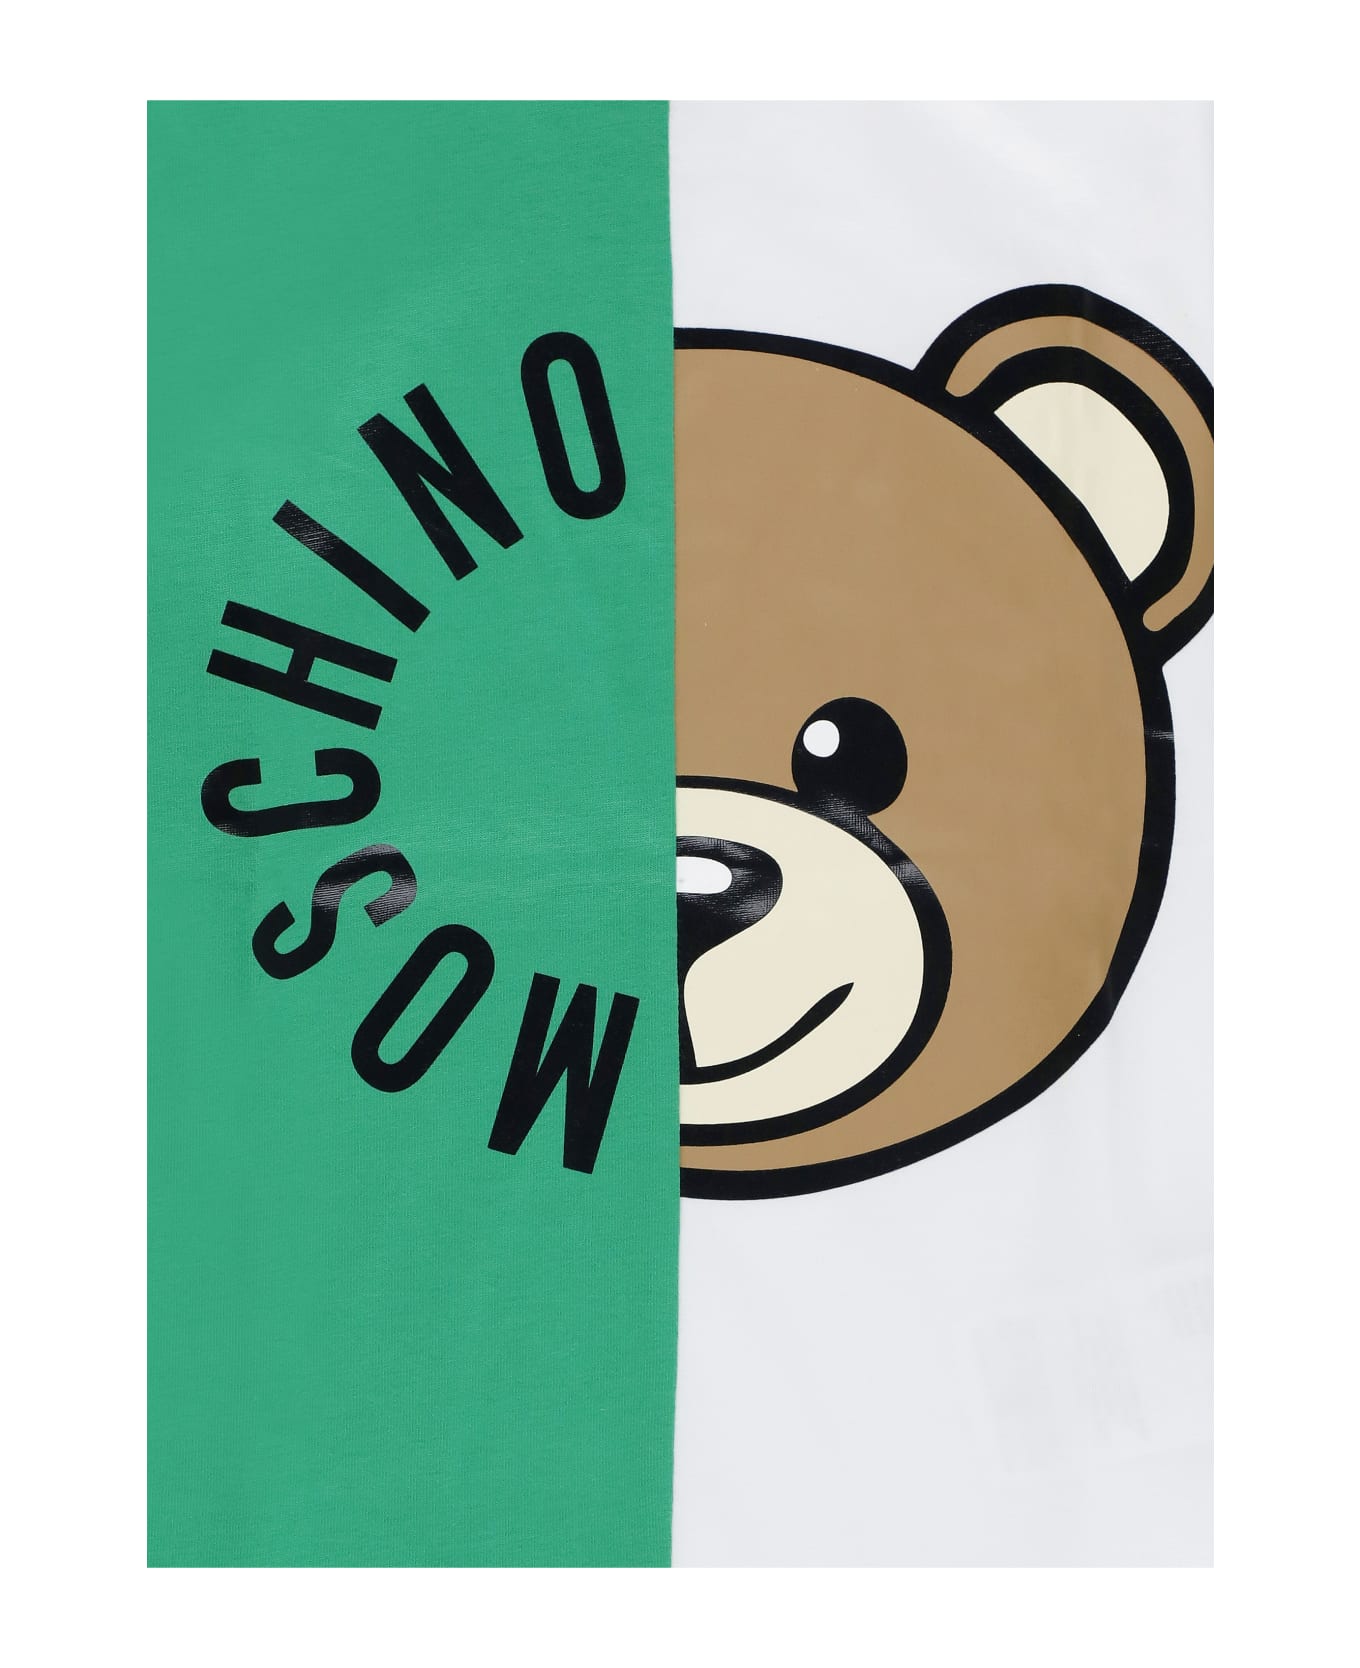 Moschino T-shirt With Print - Green